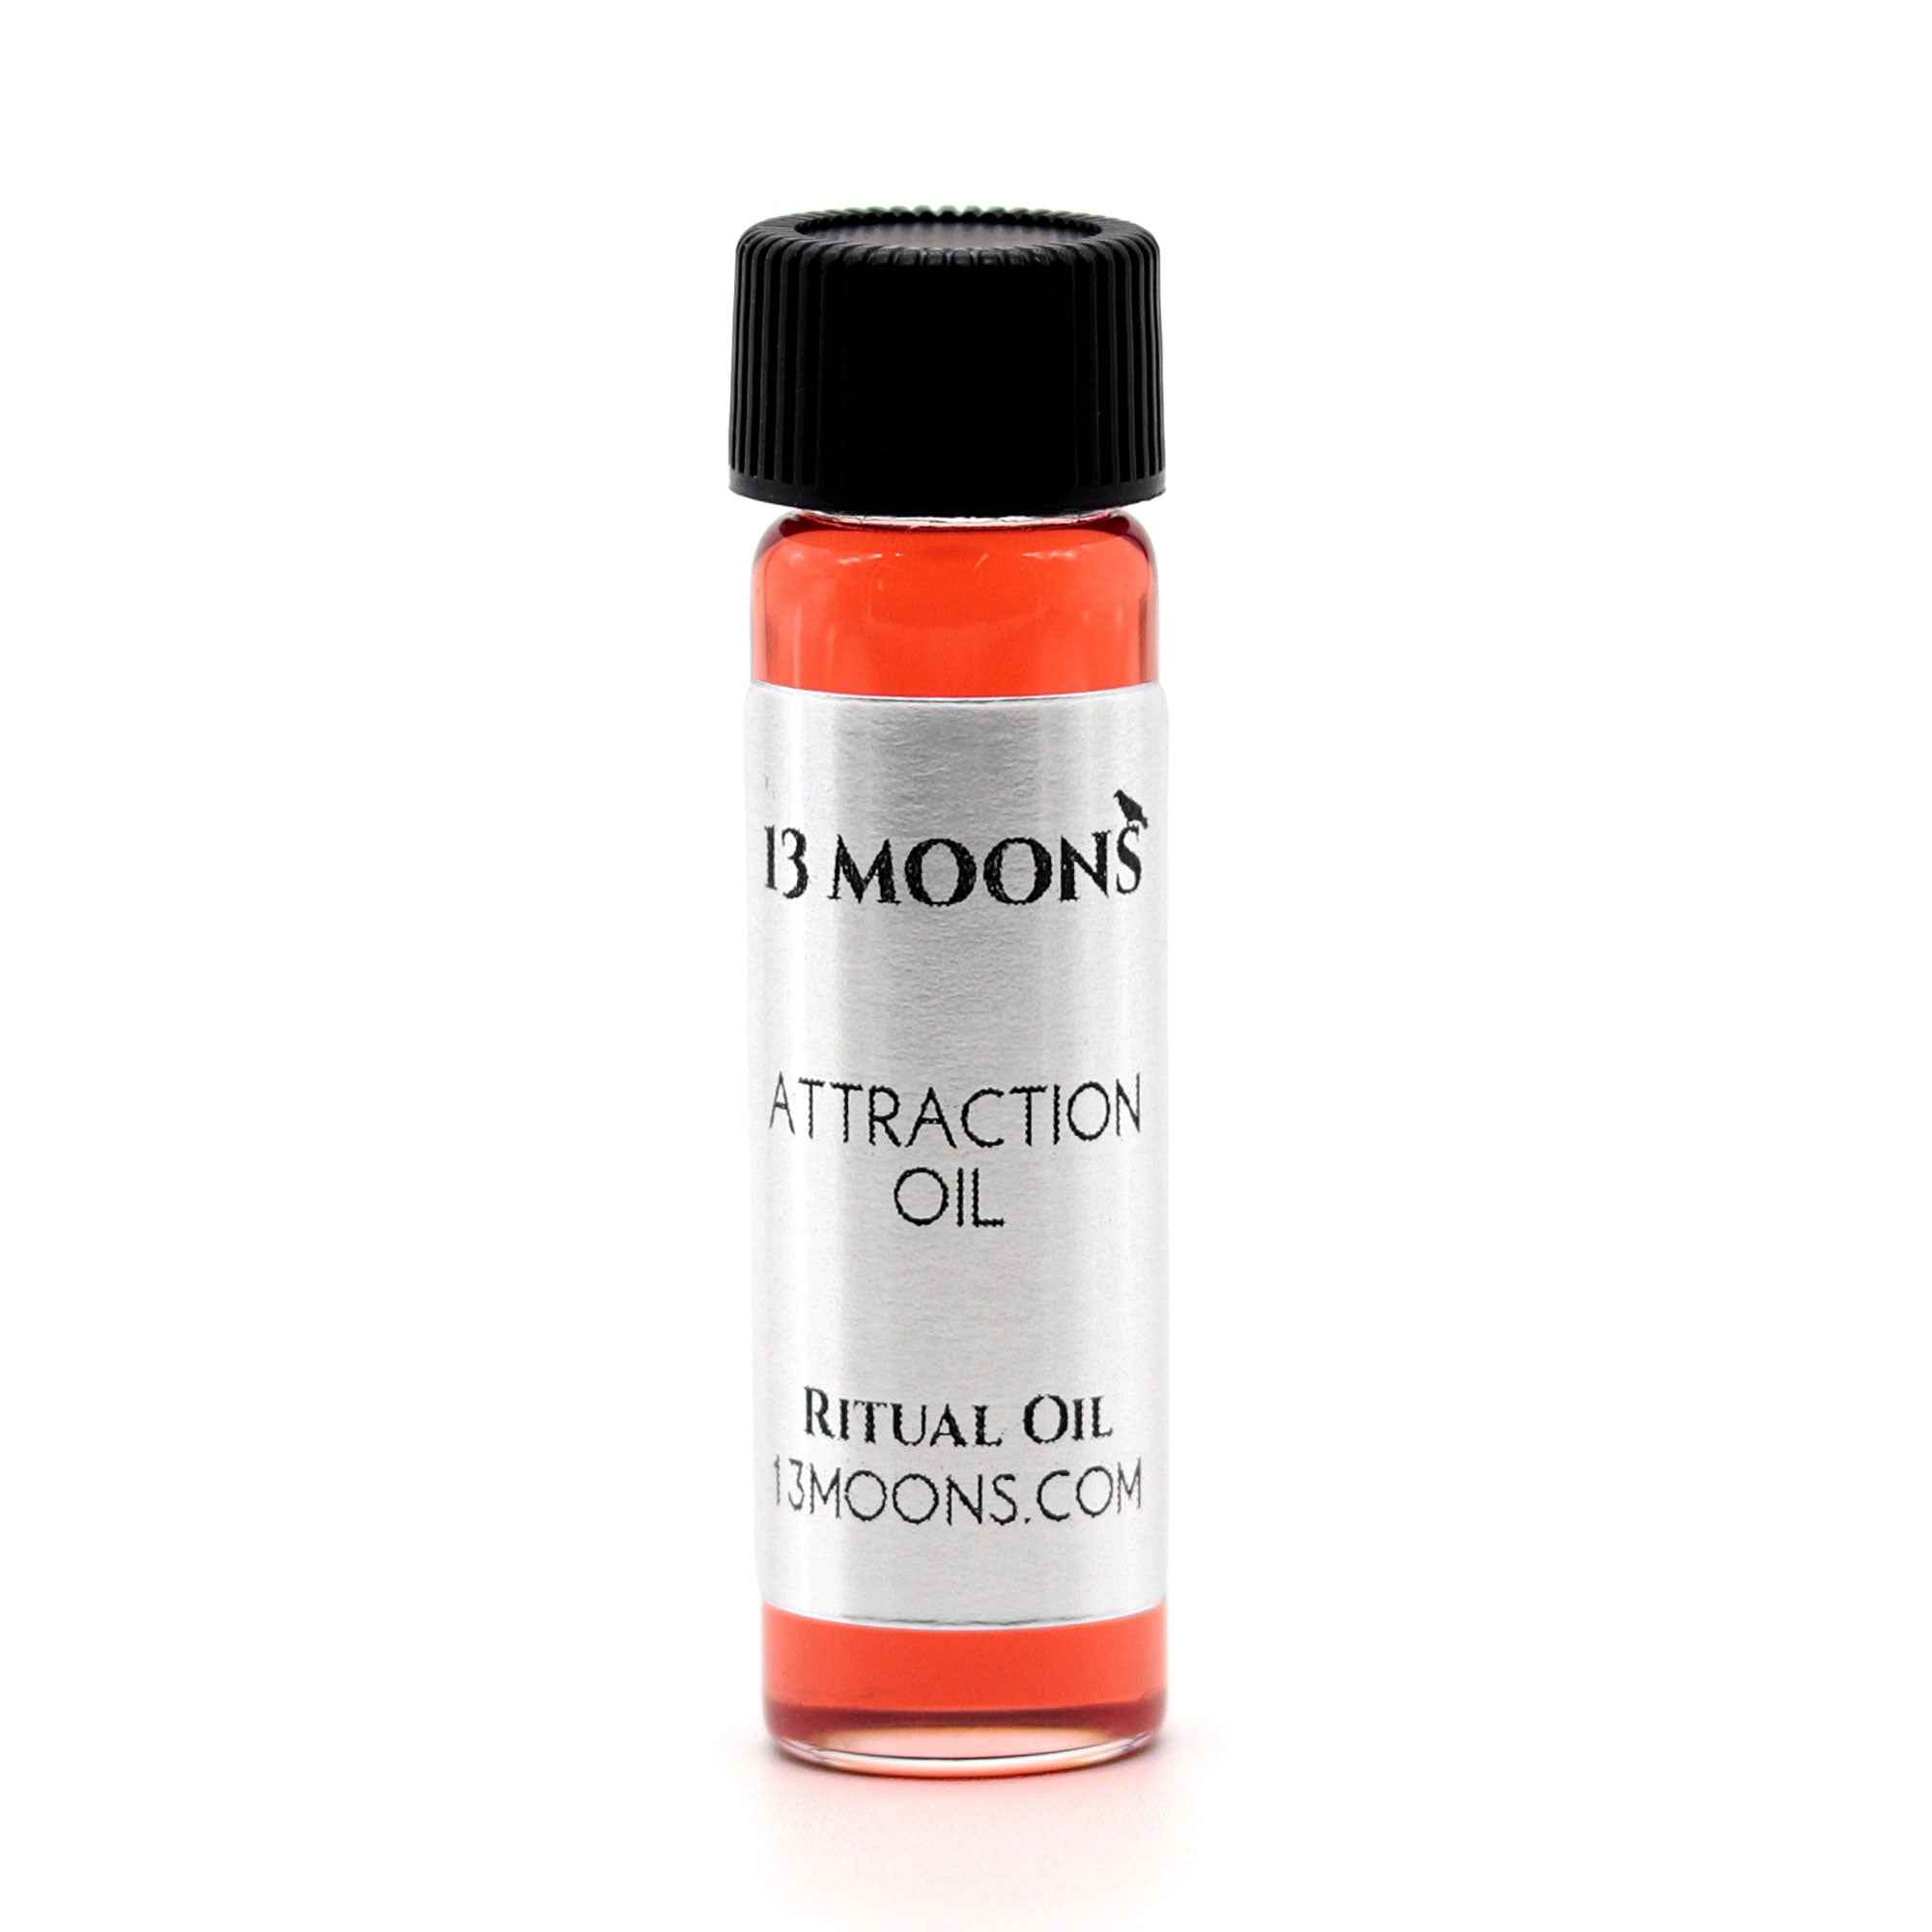 Attraction Oil by 13 Moons - 13 Moons